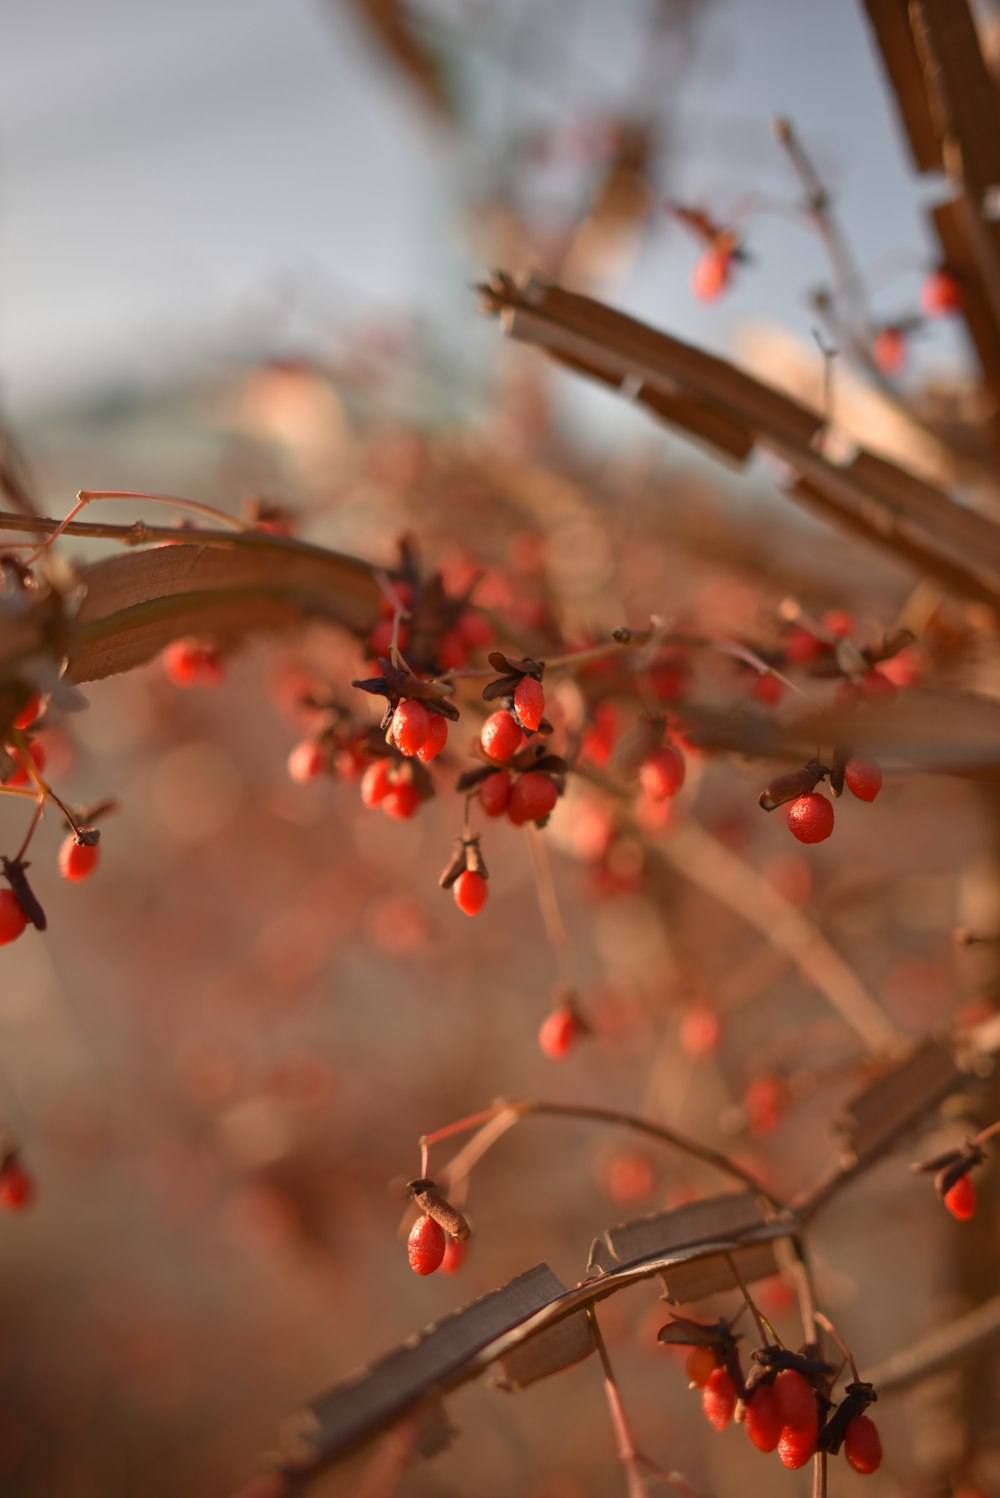 a close up of a tree branch with red berries